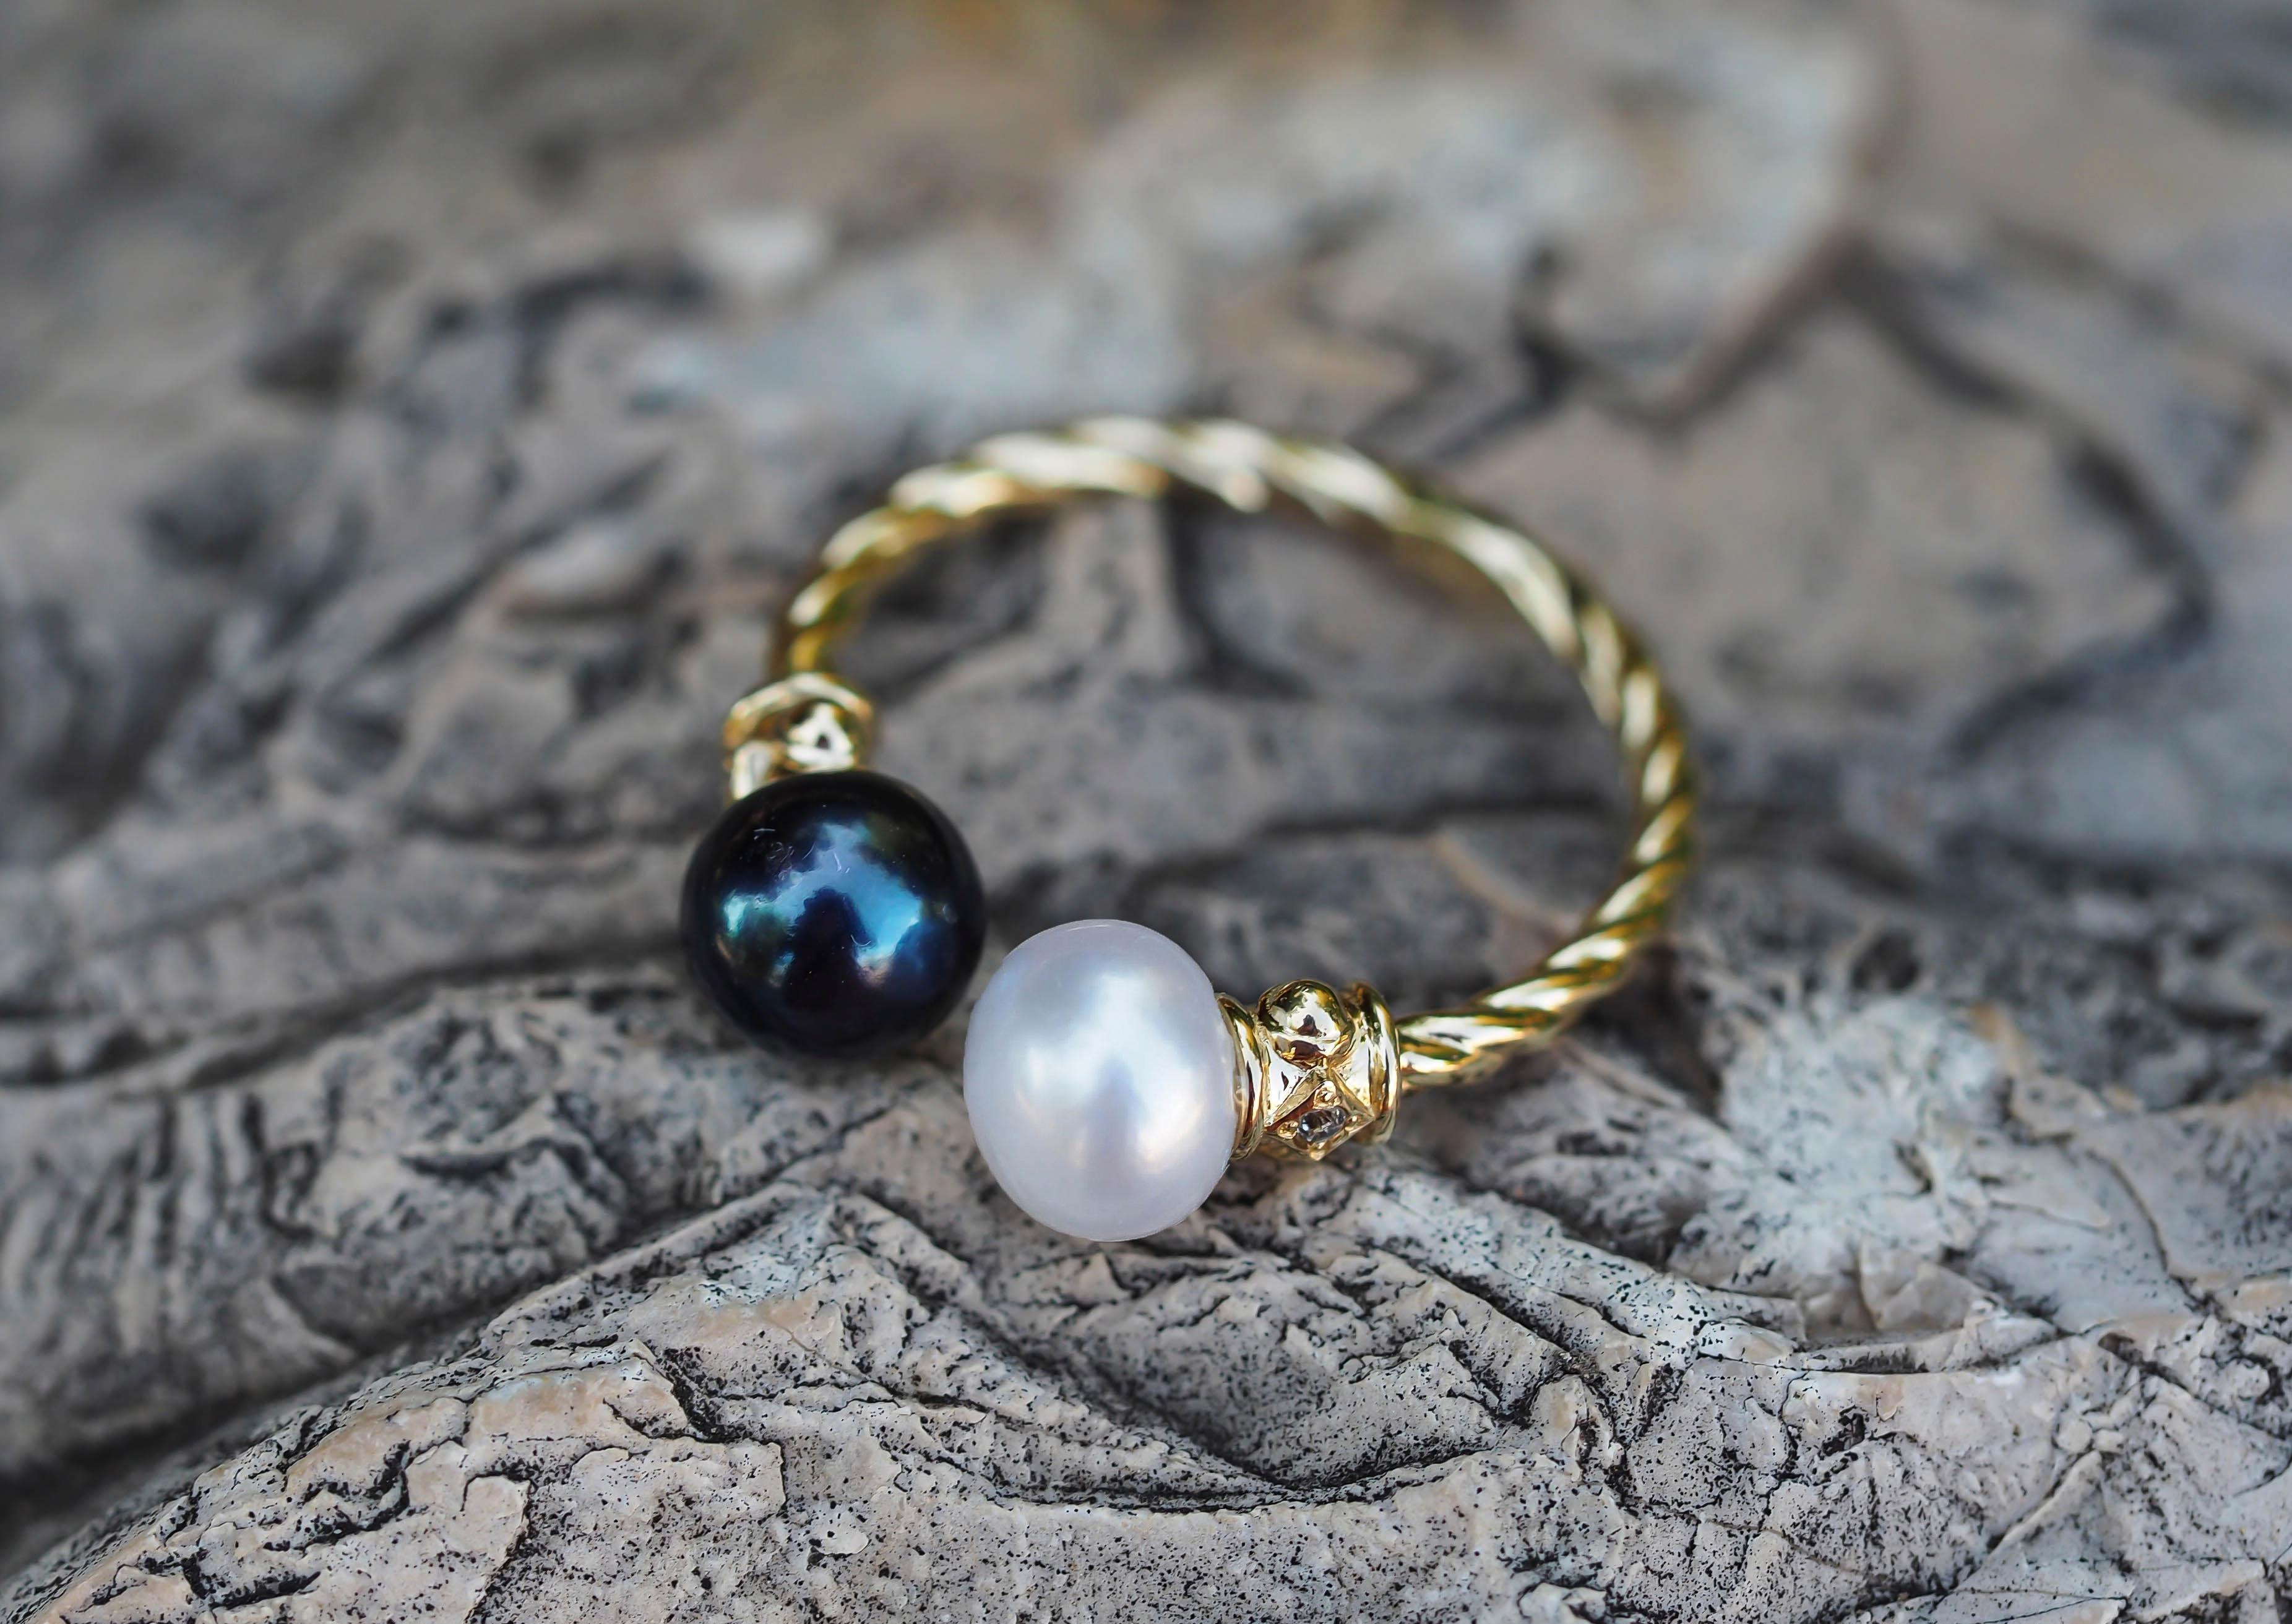 Black, White pearl 14k gold ring. 
Open Ended Ring. Twisted gold ring. Pearl gold ring. Adjustable gold ring. Two color pearls ring.

Total weight: 2.50 g. depends from size 
Metal: 14k gold

Stones: 
1. Pearl
Cut: button
Size: 6 mm 
Color: